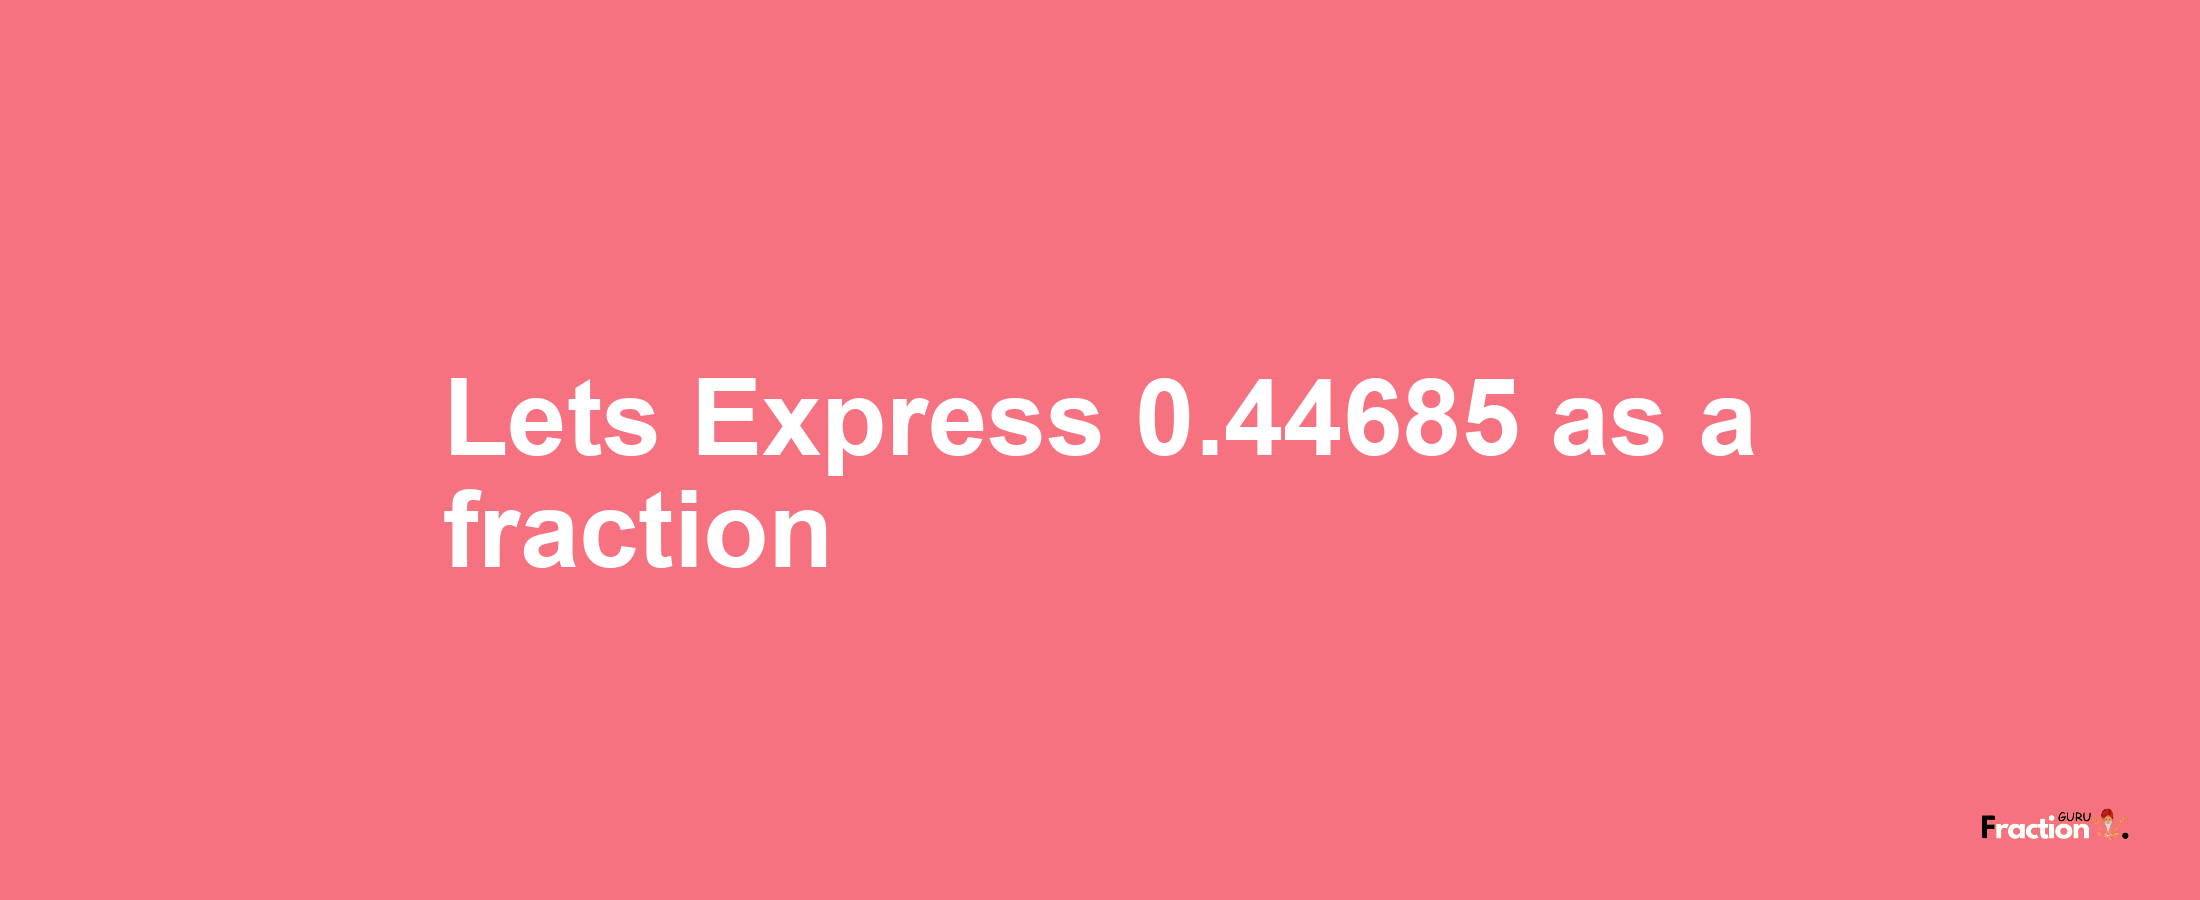 Lets Express 0.44685 as afraction